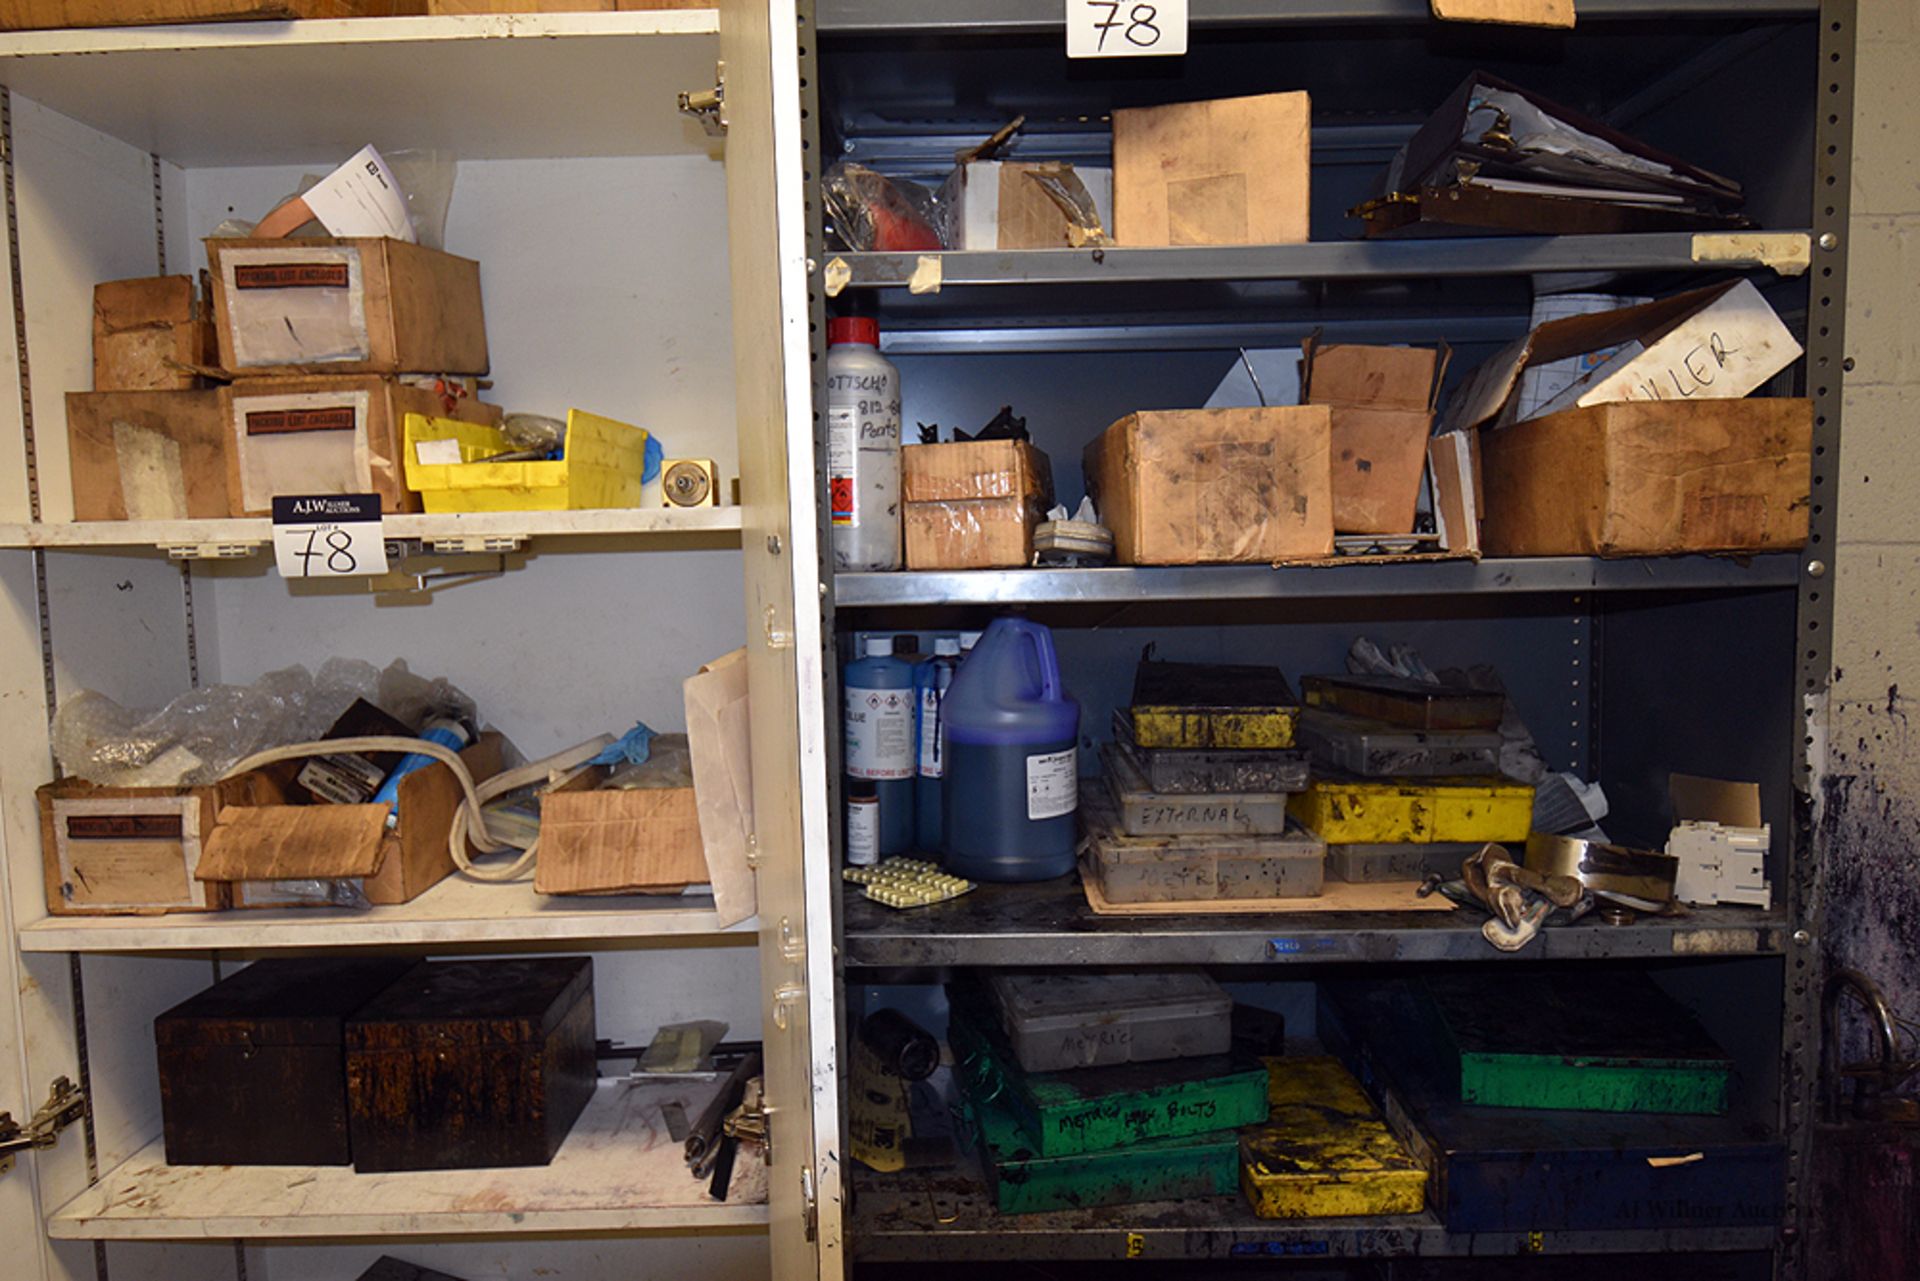 2-Door Cabinet & Shelving Units w/Contents ( Fittings, Fasteners, Machine Party, Etc) - Image 2 of 2